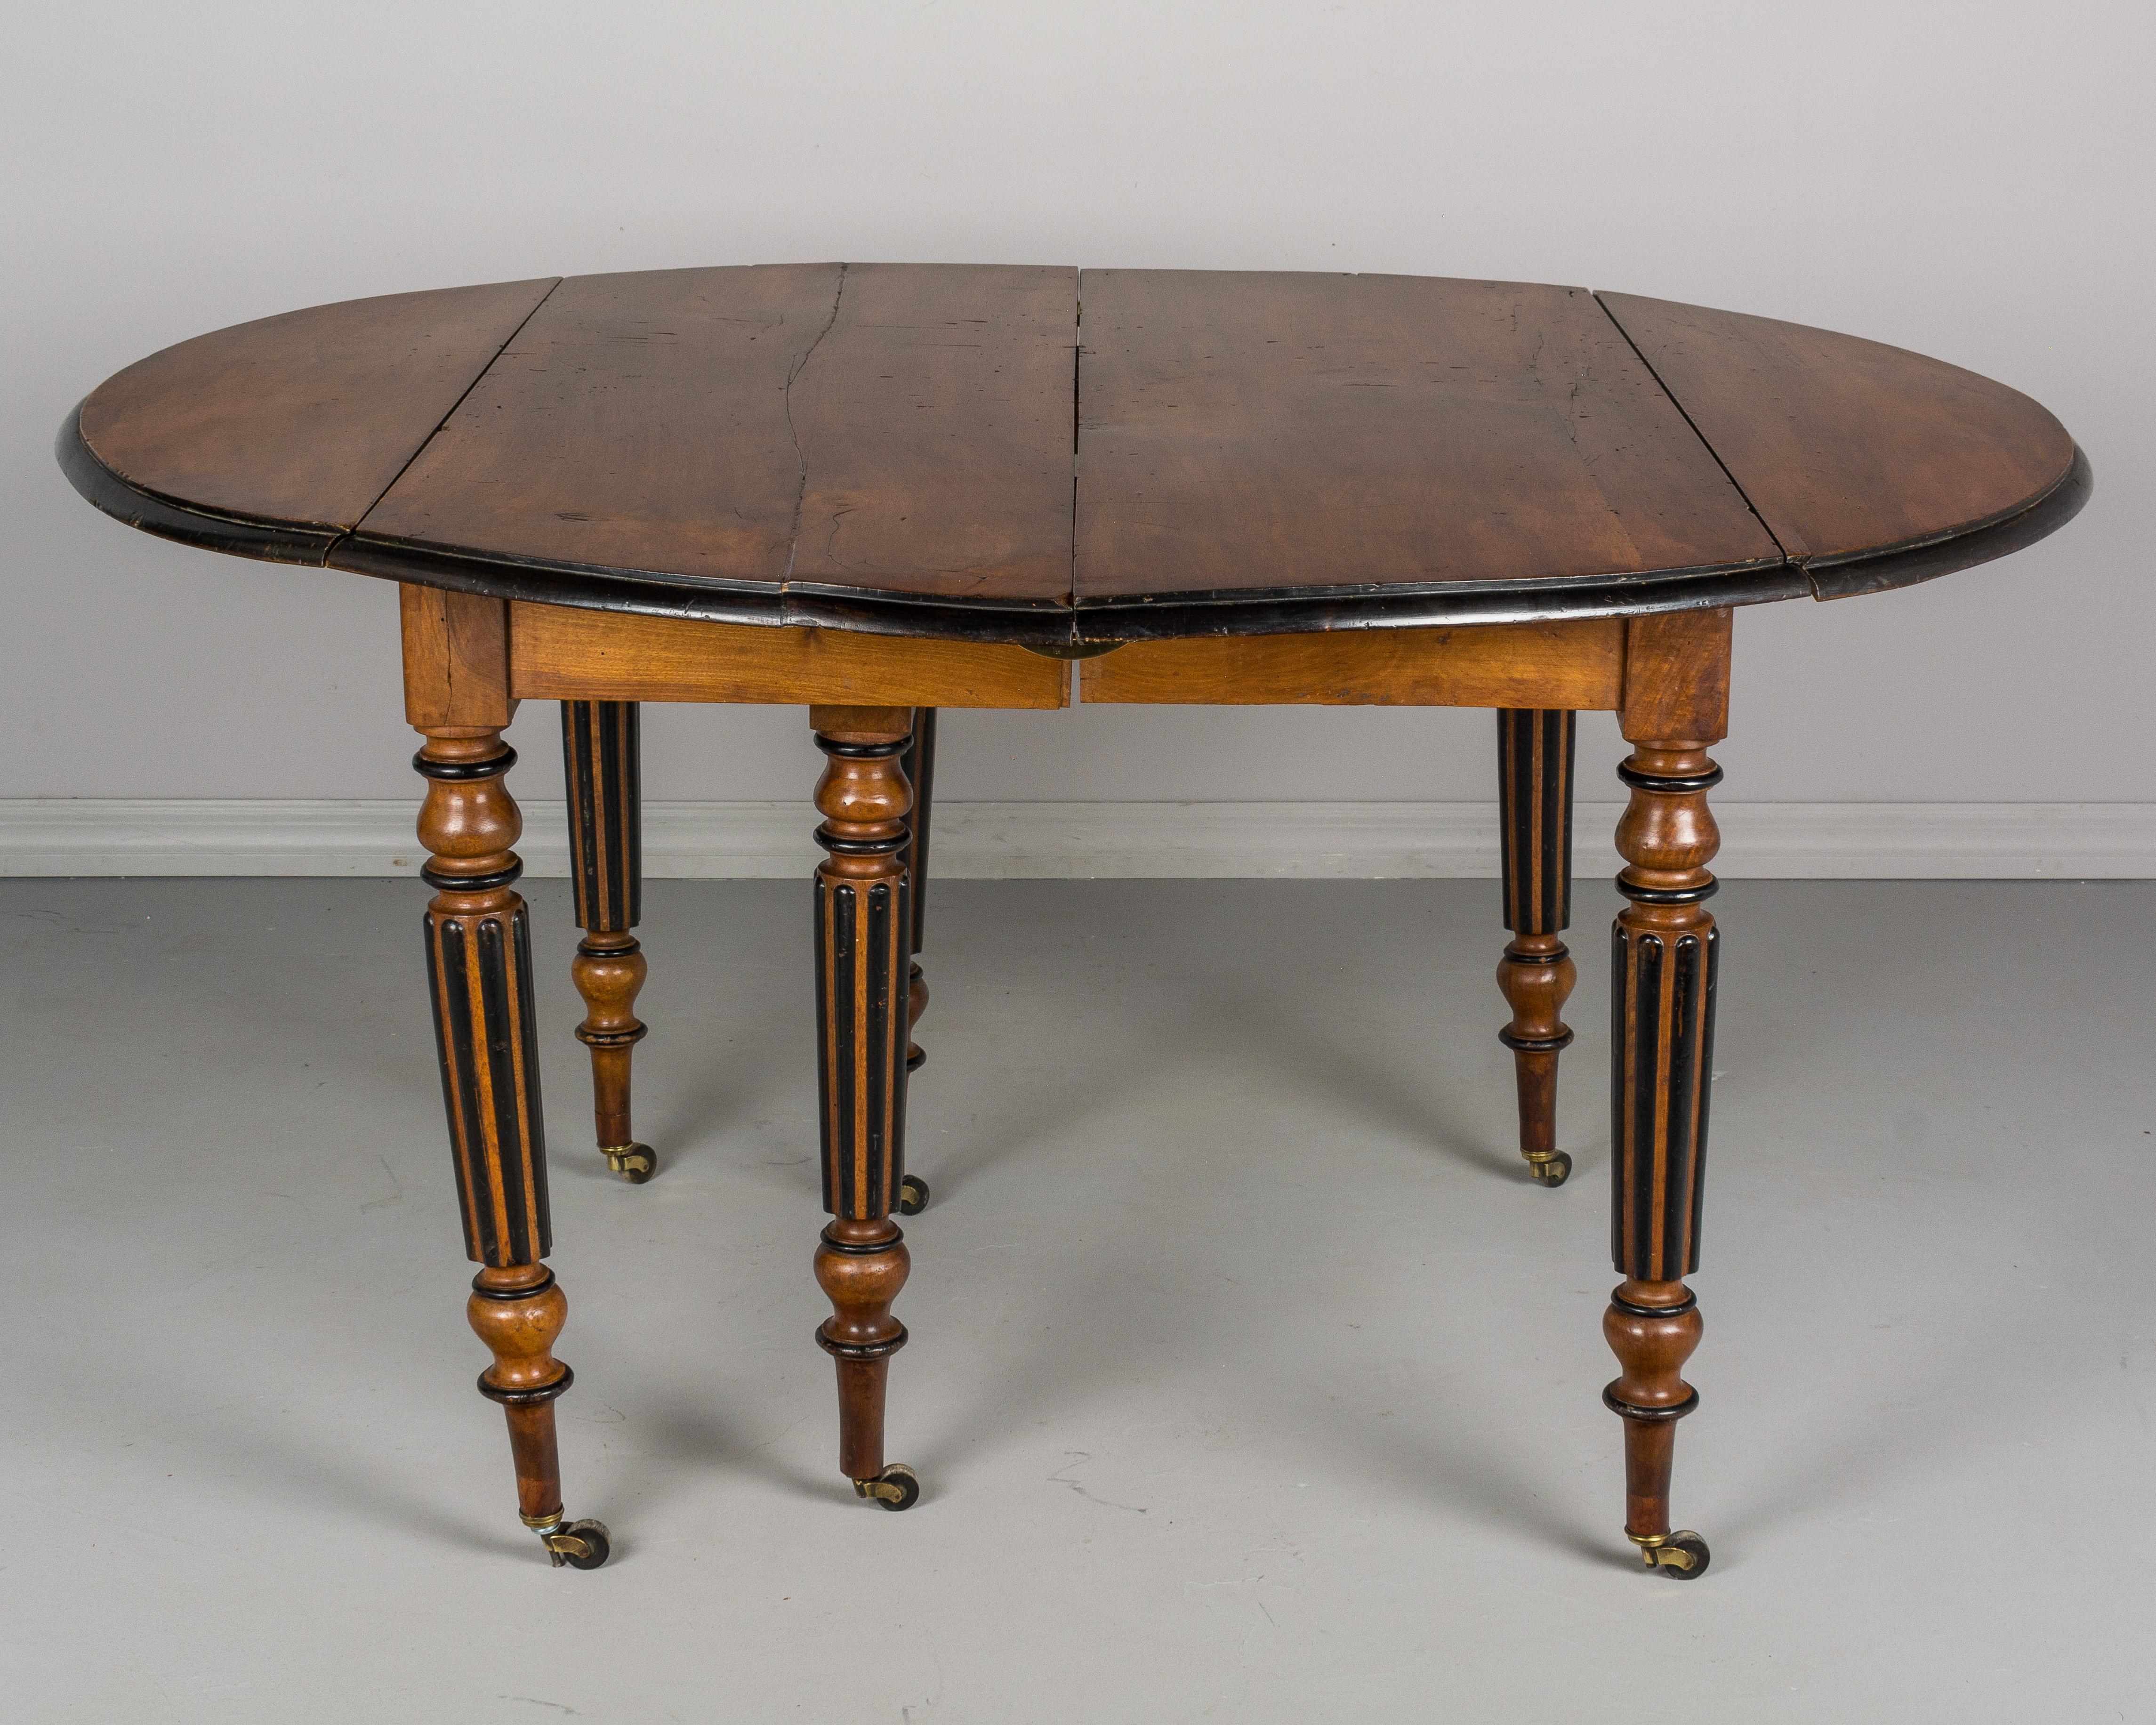 Hand-Crafted 19th Century French Napoleon III Style Dining Table